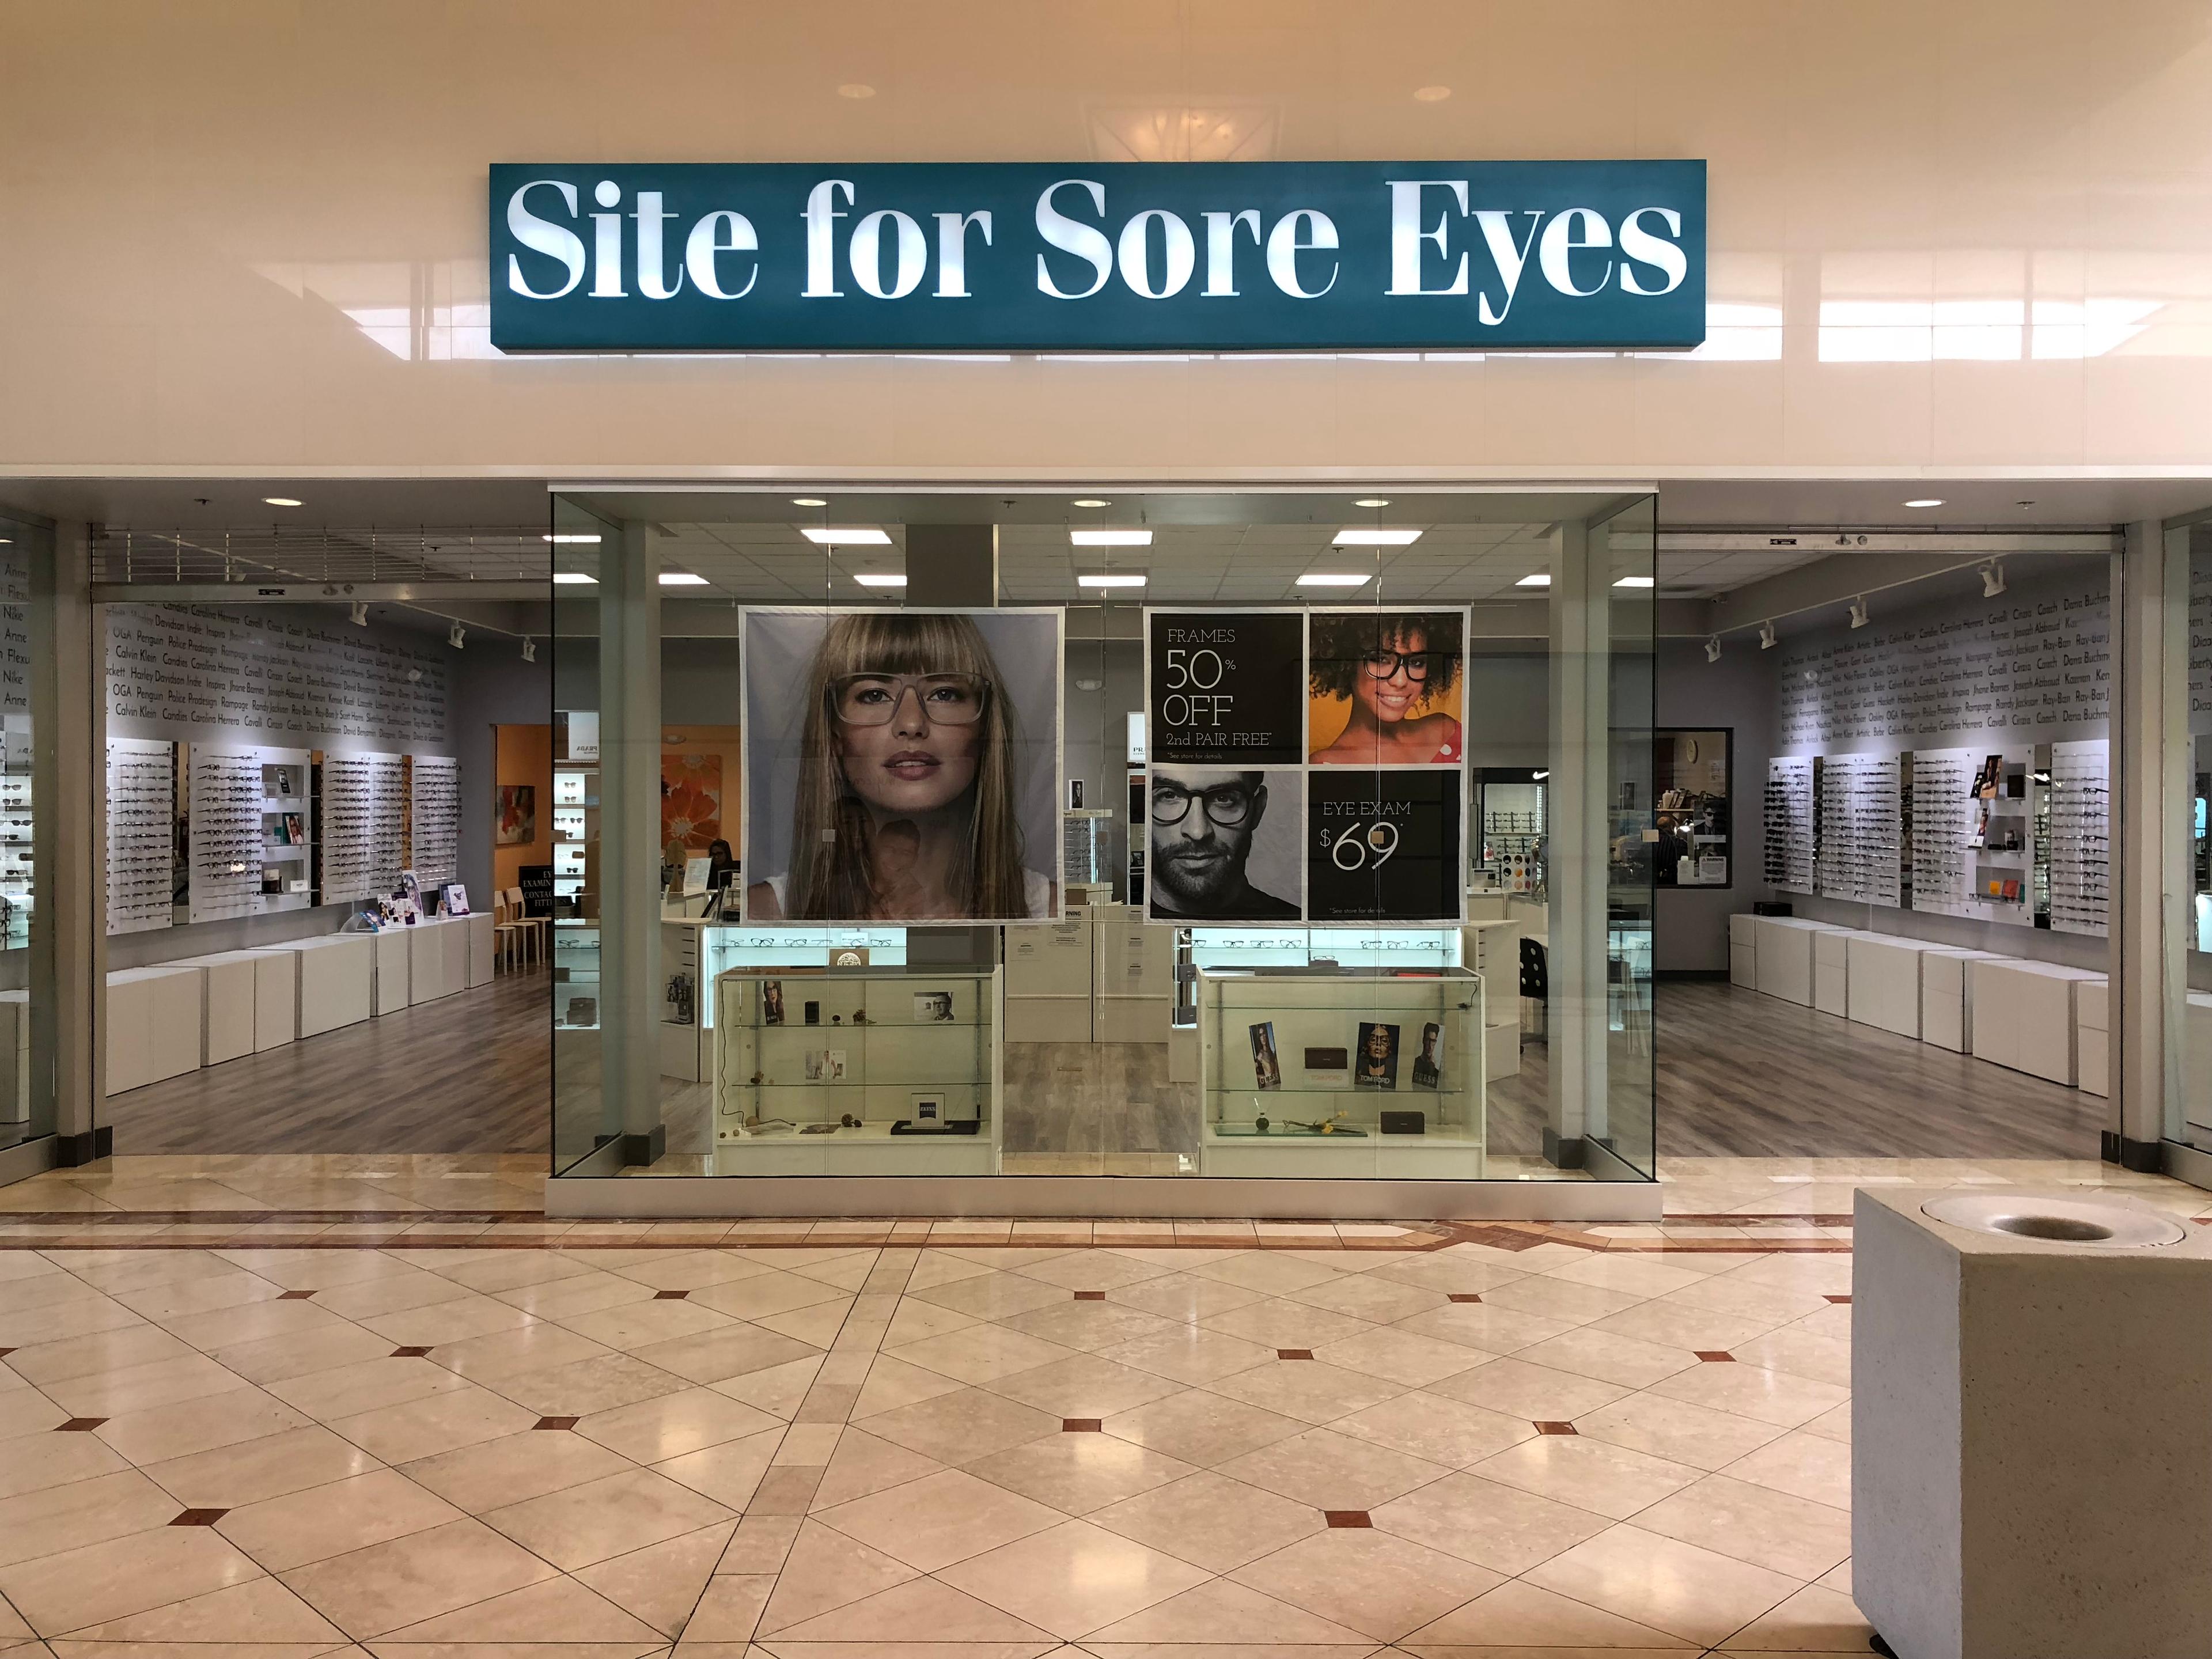 Picture of Site for Sore Eyes - Daly City is located at 44 Serramonte Center (Serramonte Mall) in Daly City. - Site for Sore Eyes - Daly City & West Portal-San Francisco